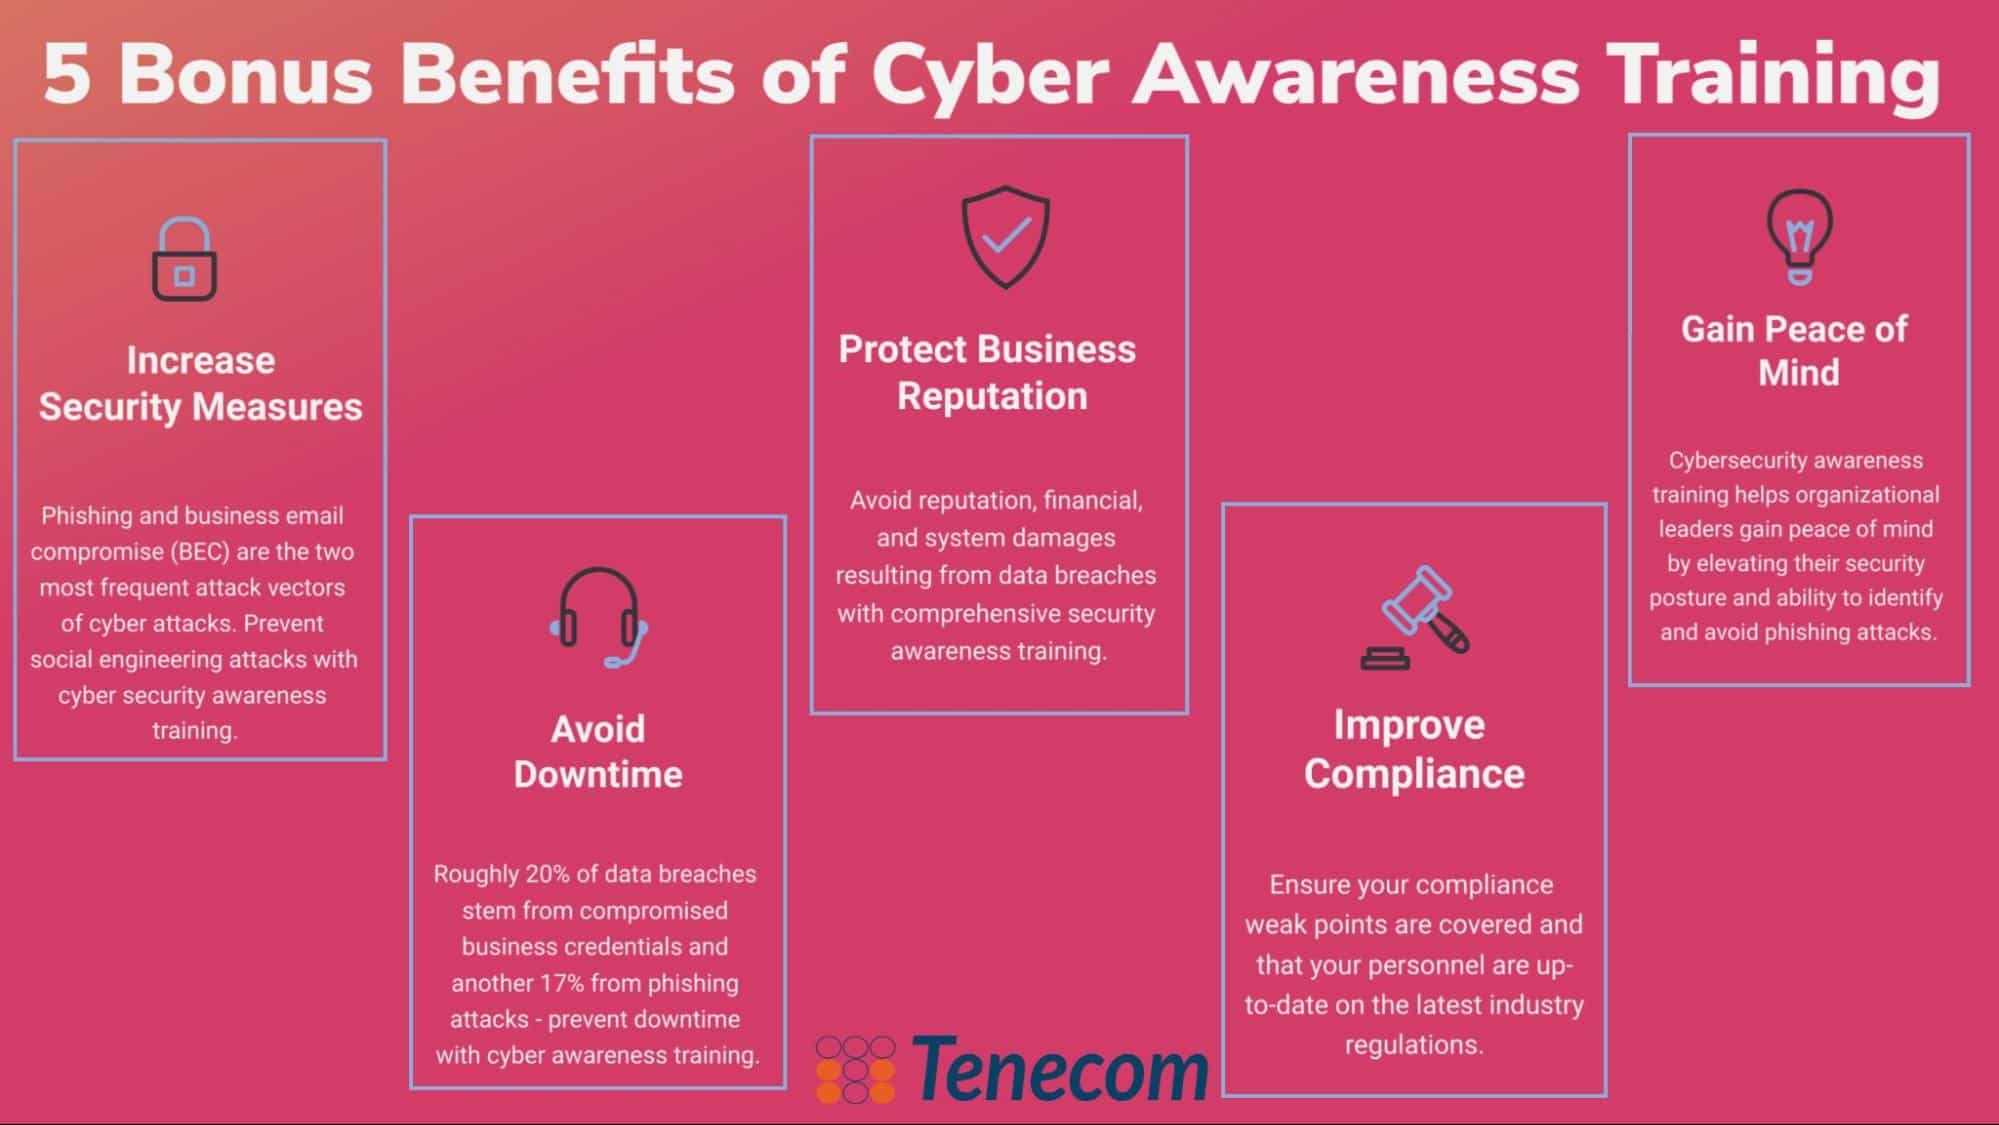 Cyber Security Training Benefits 